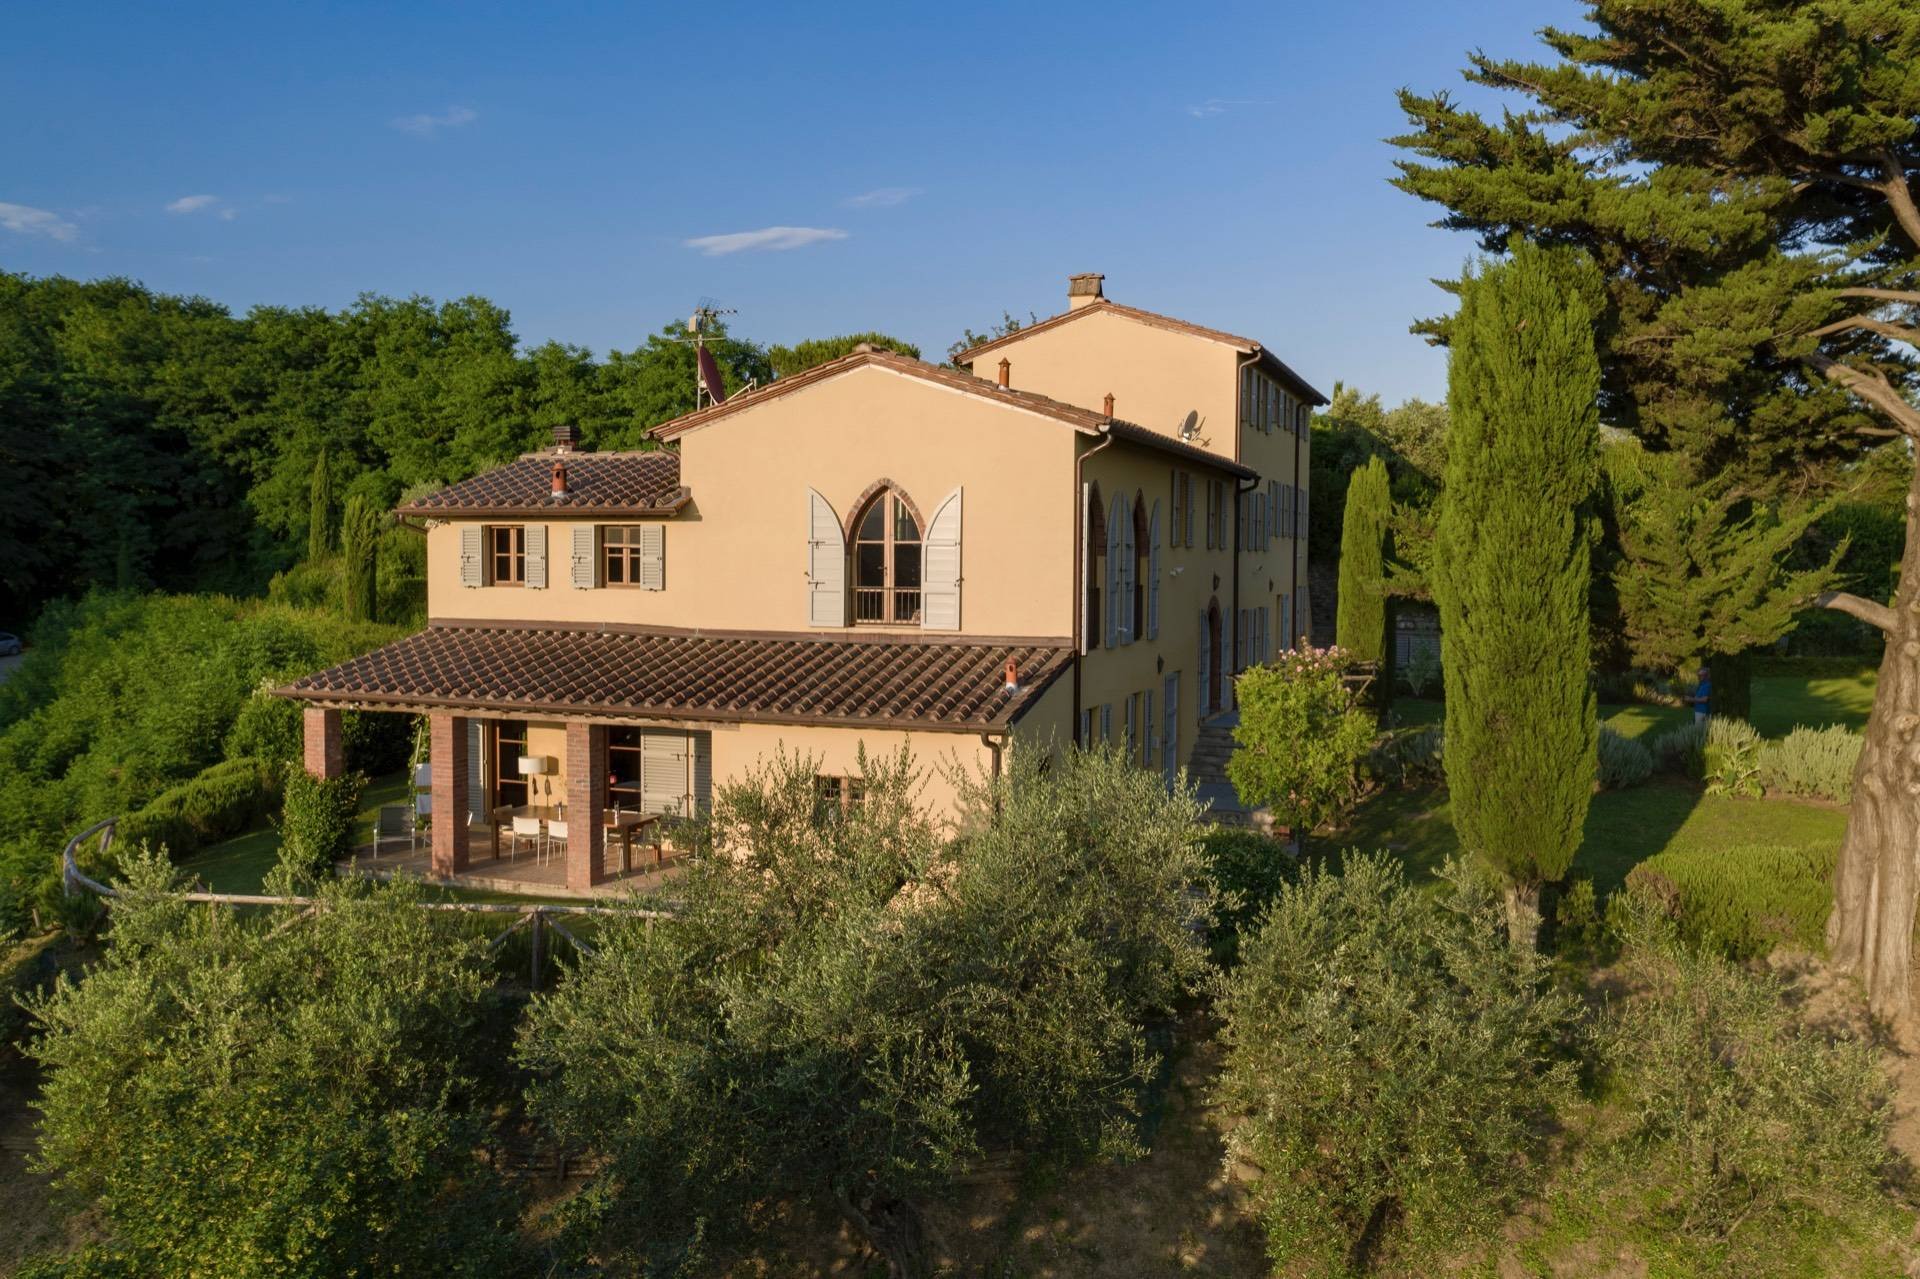 Francis York  Turnkey Italian Villa With Vineyards and Olive Groves Near Lucca 00010.jpg